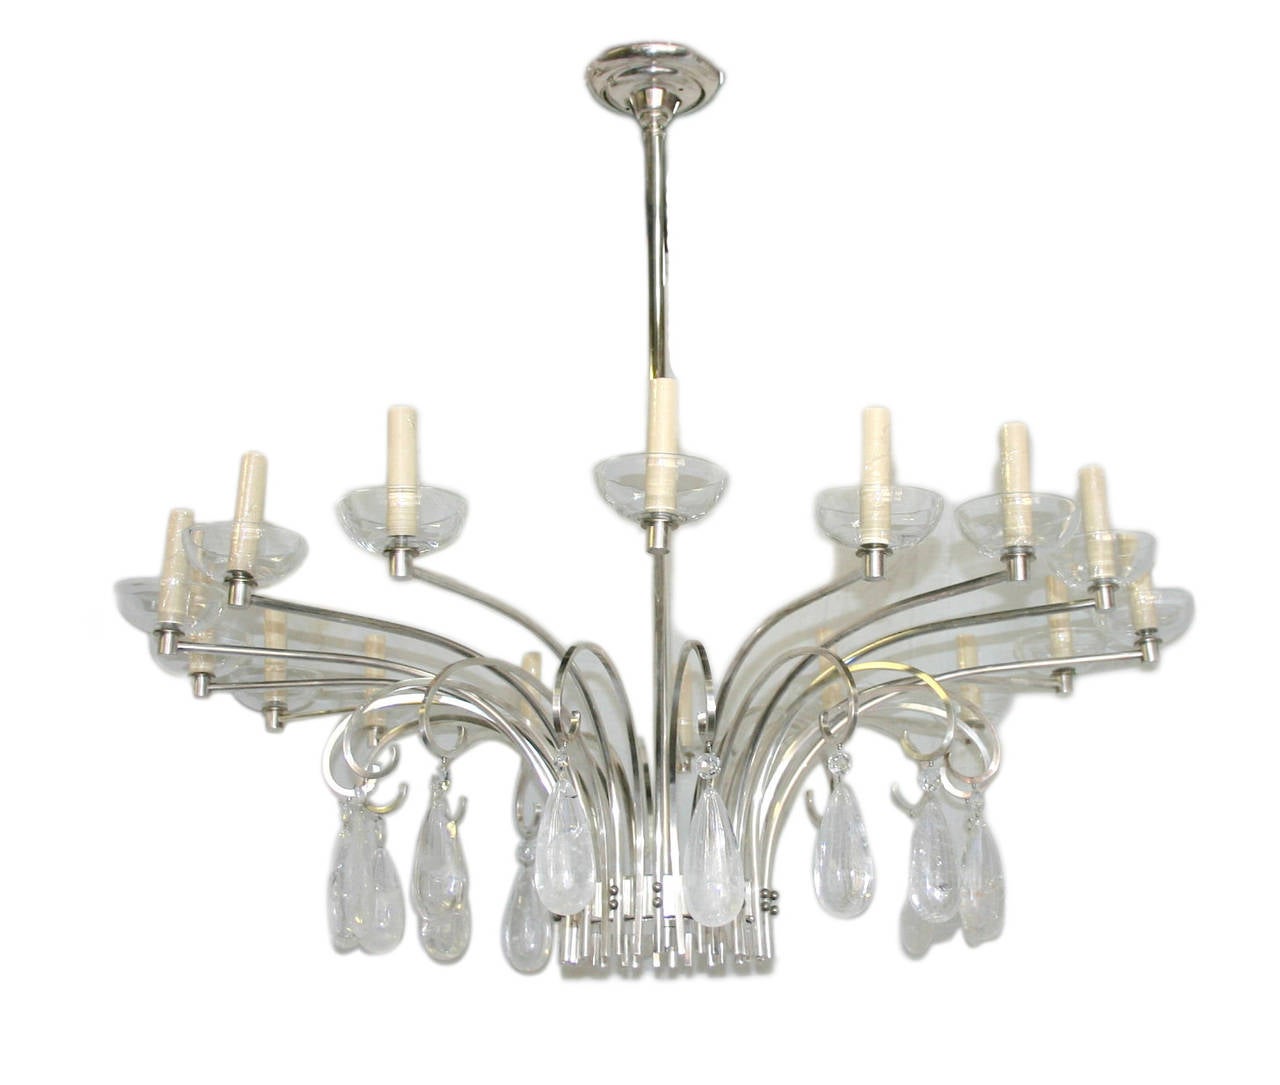 An Italian sixteen-light silver plated chandelier with Lucite bobeches and rock crystal hangings, circa 1960s.
Measurements:
40